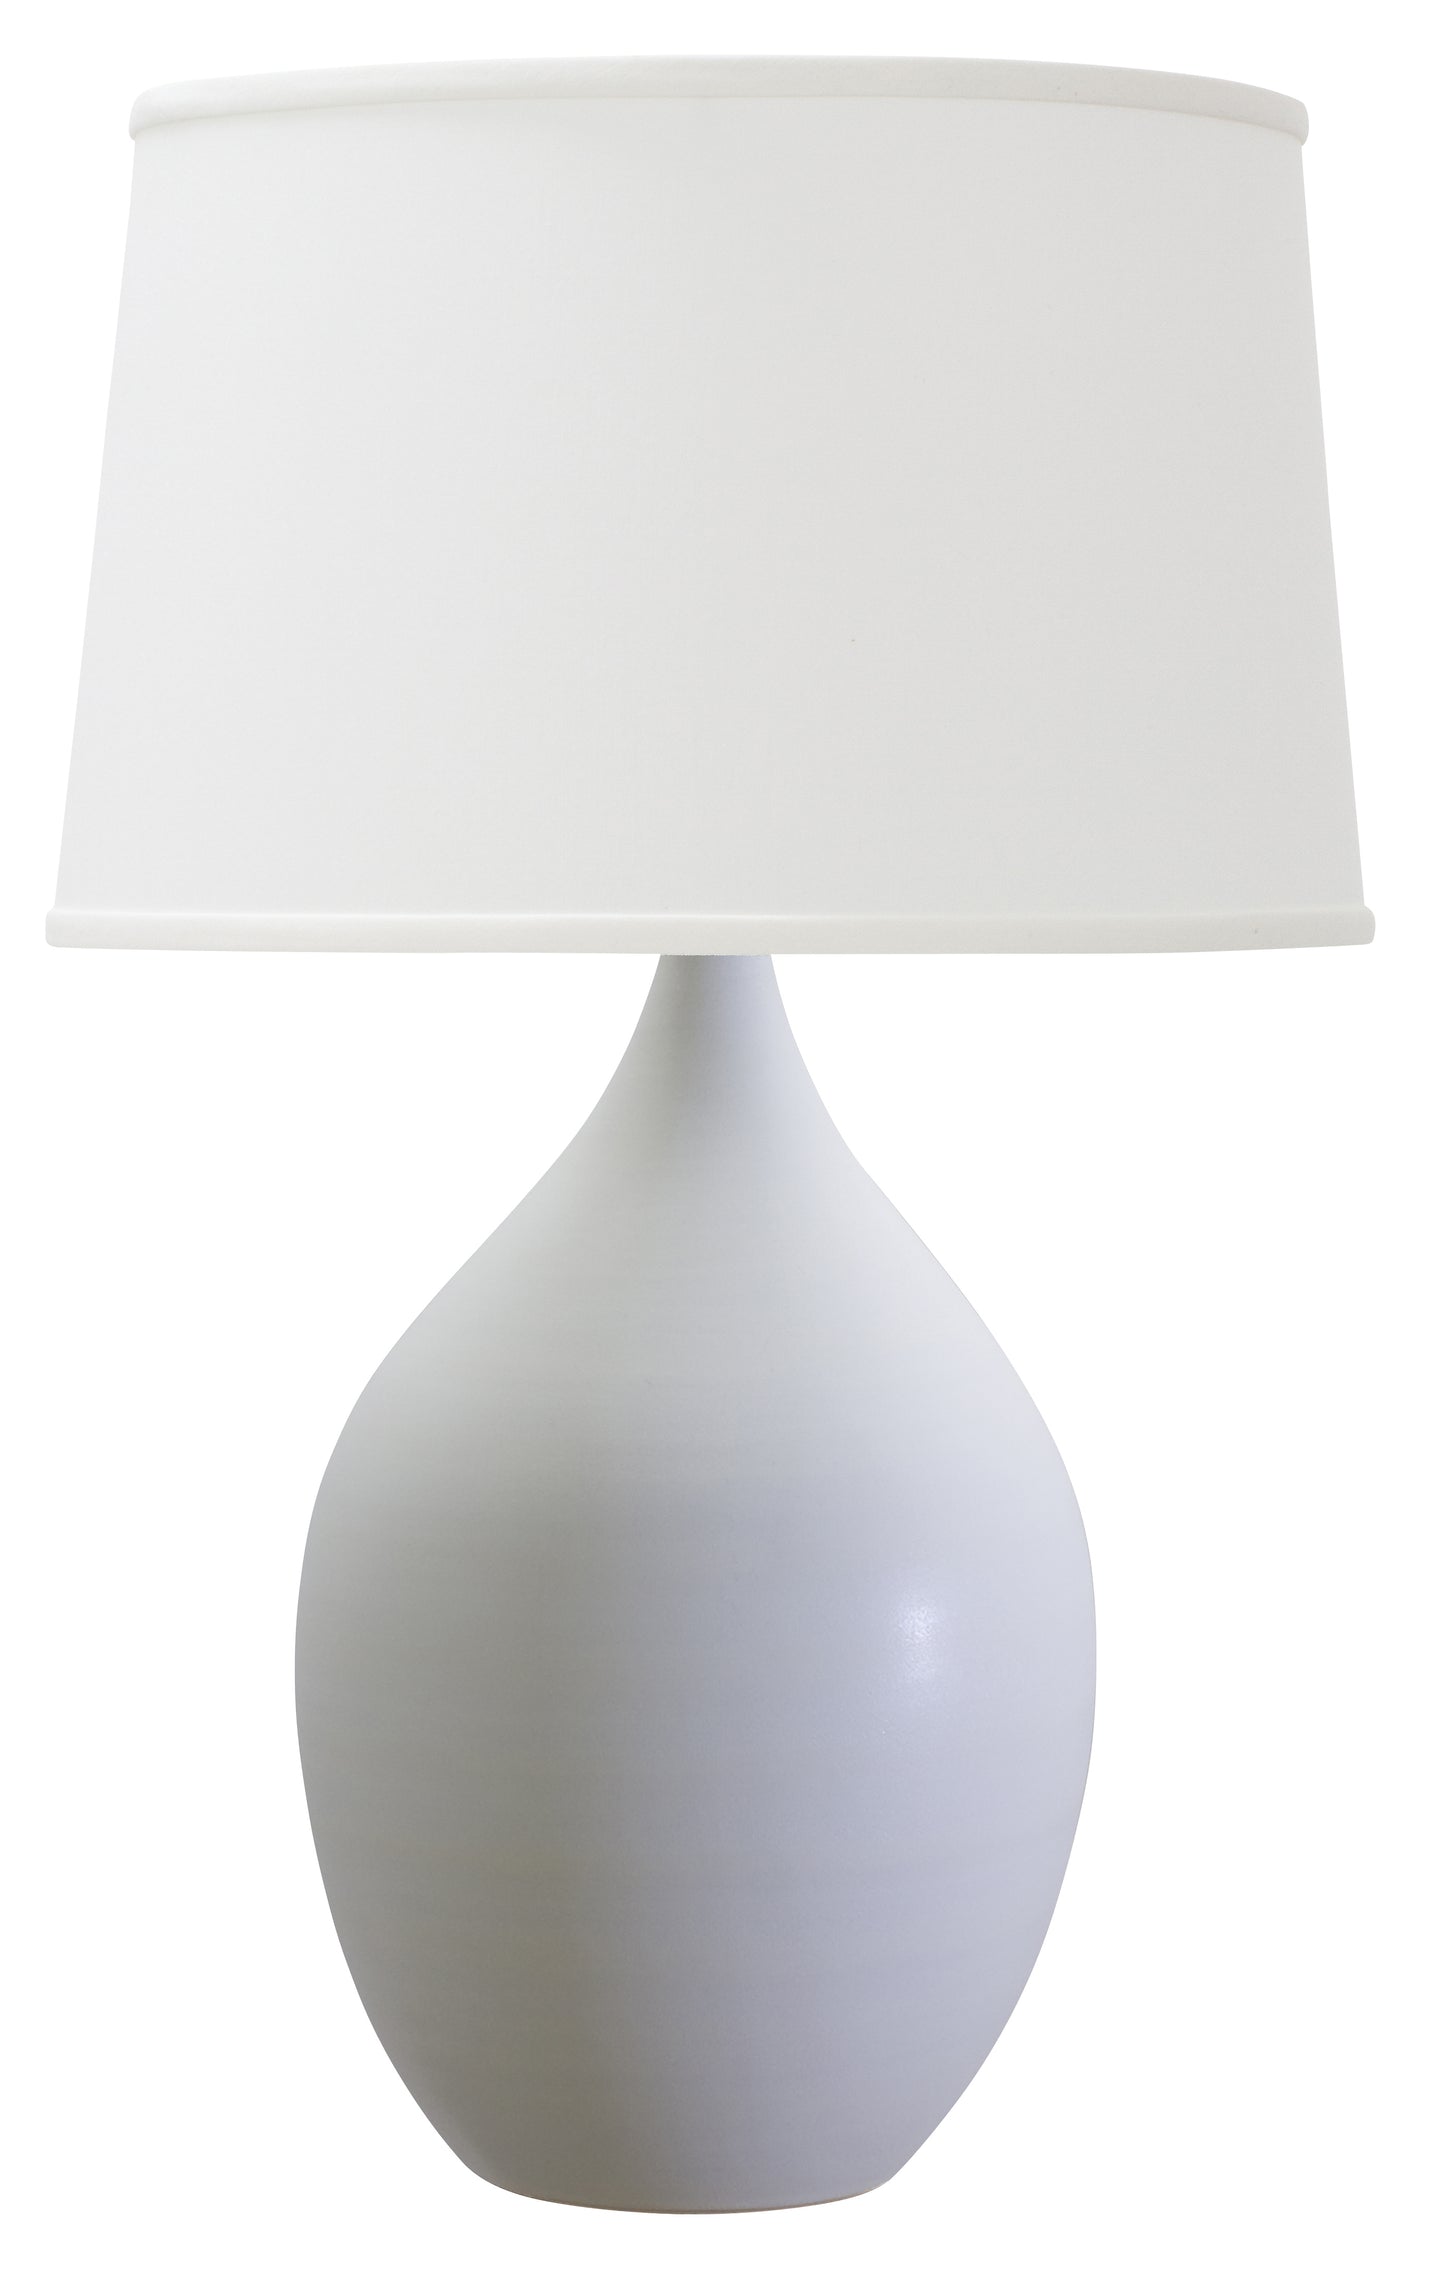 House of Troy Scatchard 18.5" Stoneware Table Lamp in White Matte GS202-WM